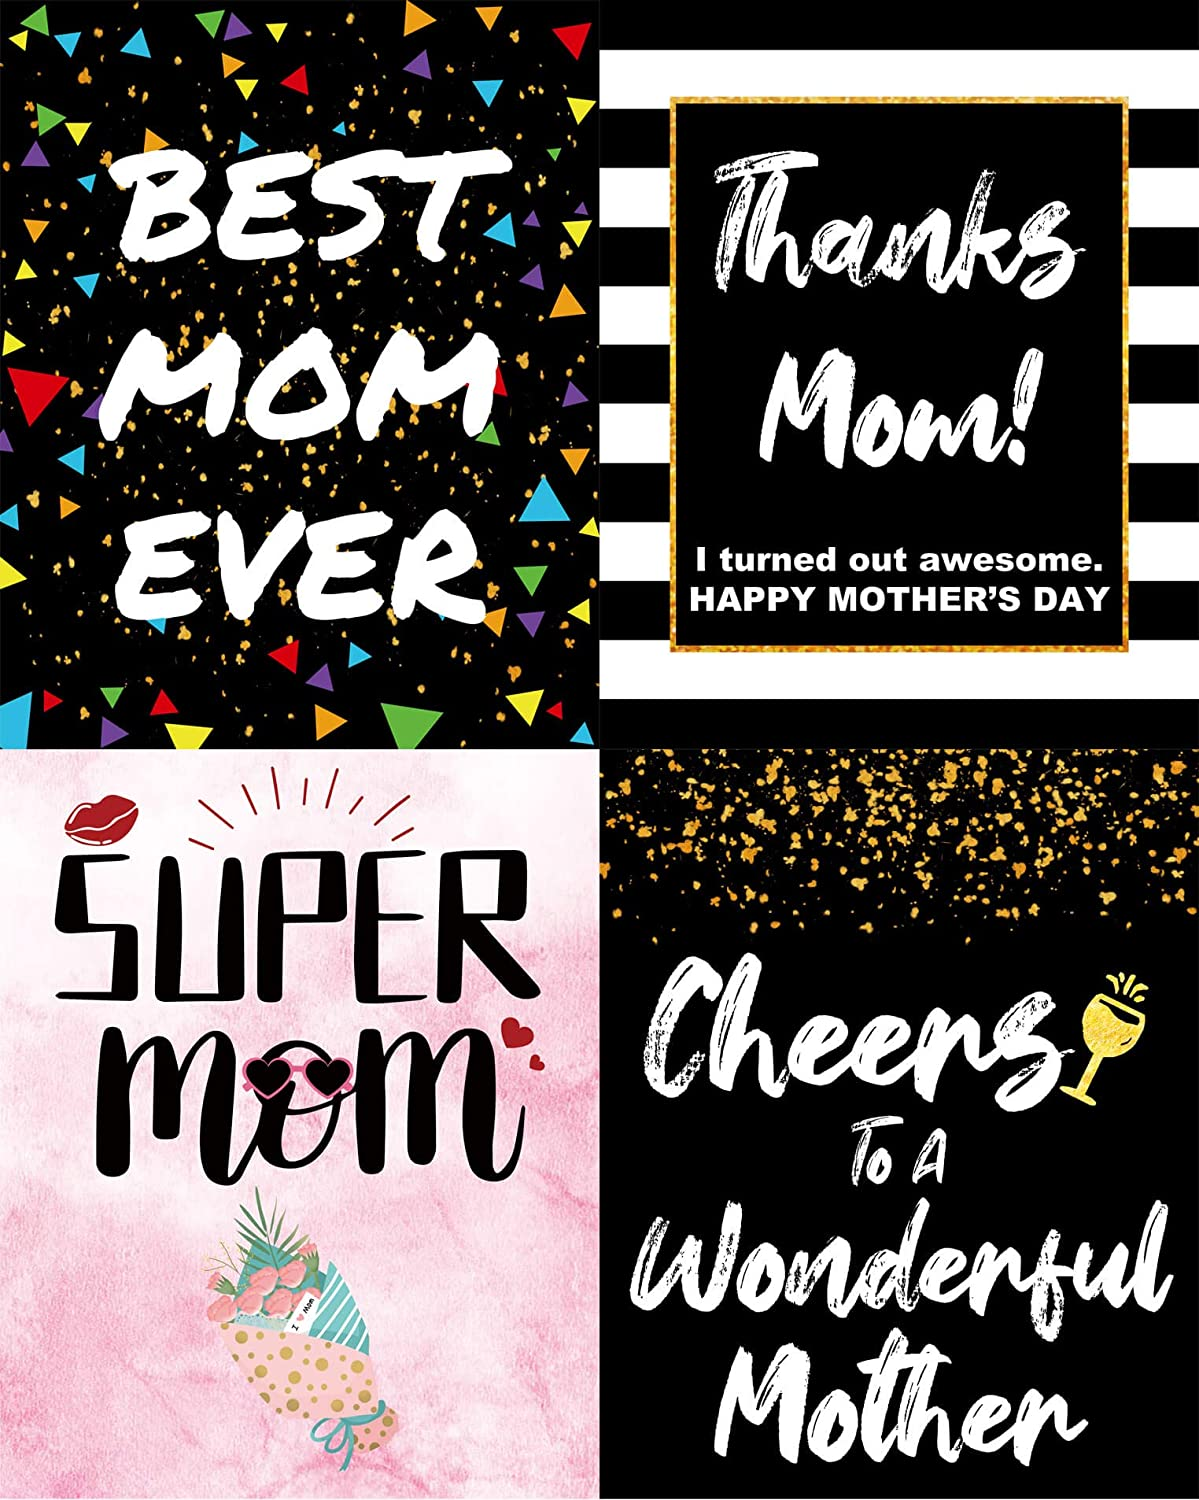 Best Mom Ever - Mother'S Day Gift for Women, Hysterical Present, Waterproof Wine Bottle Label Stickers, Set of 8 (WINE NOT INCLUDED)